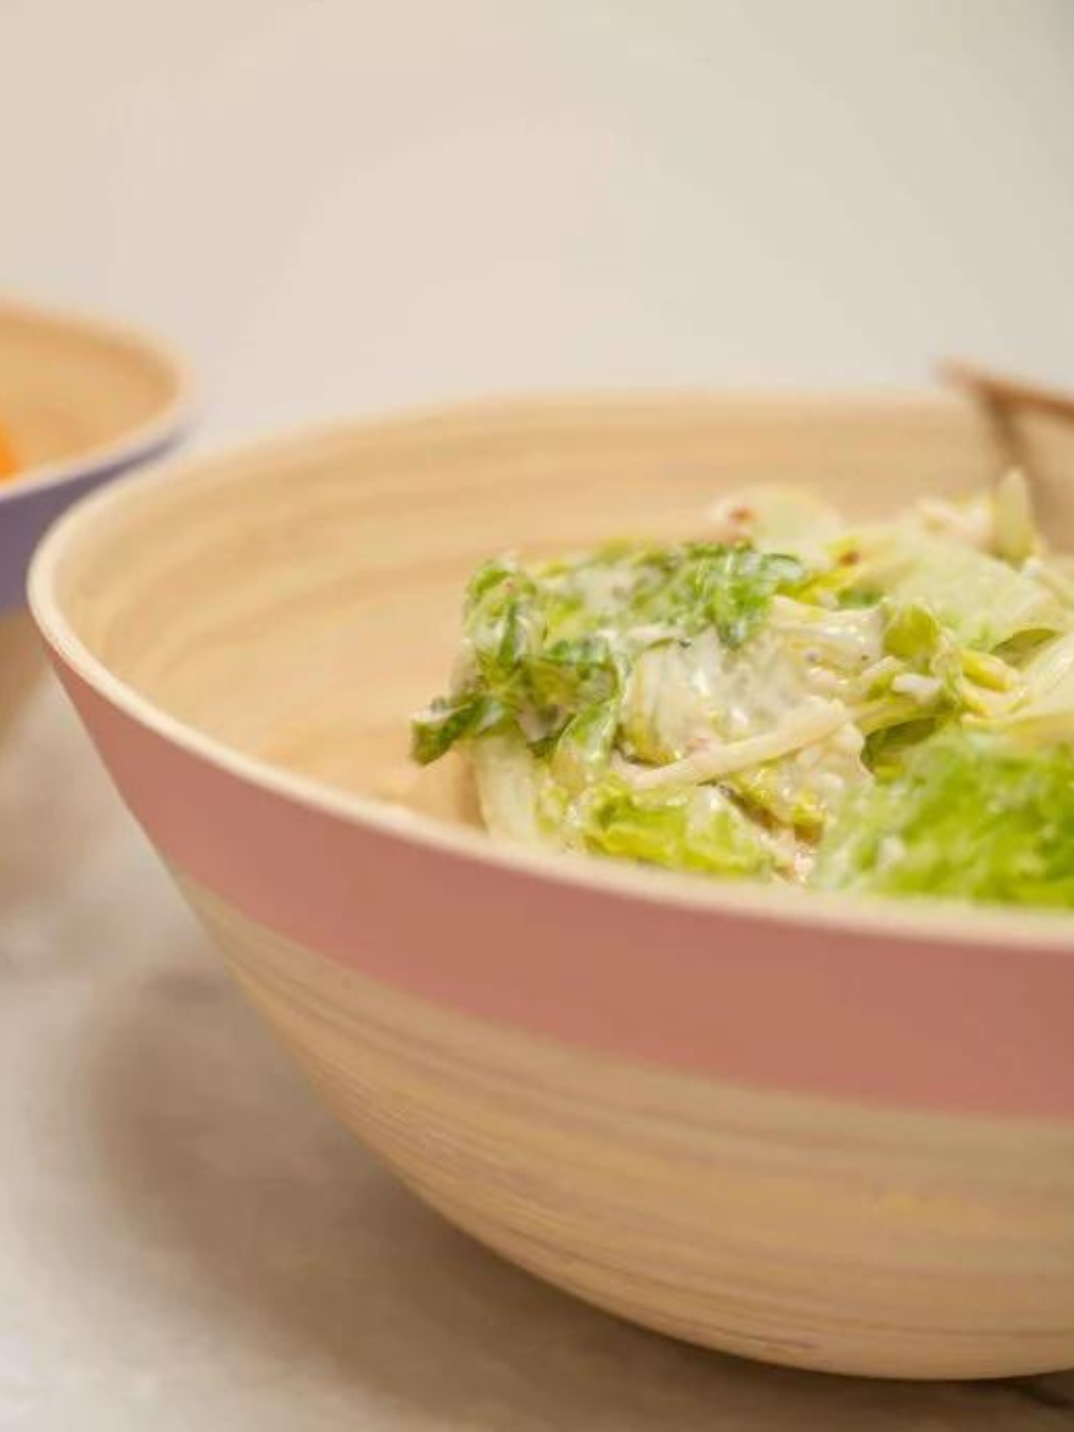 This lovely handmade organic bamboo bowl can be used for salads, snacks, pasta and fruits. 